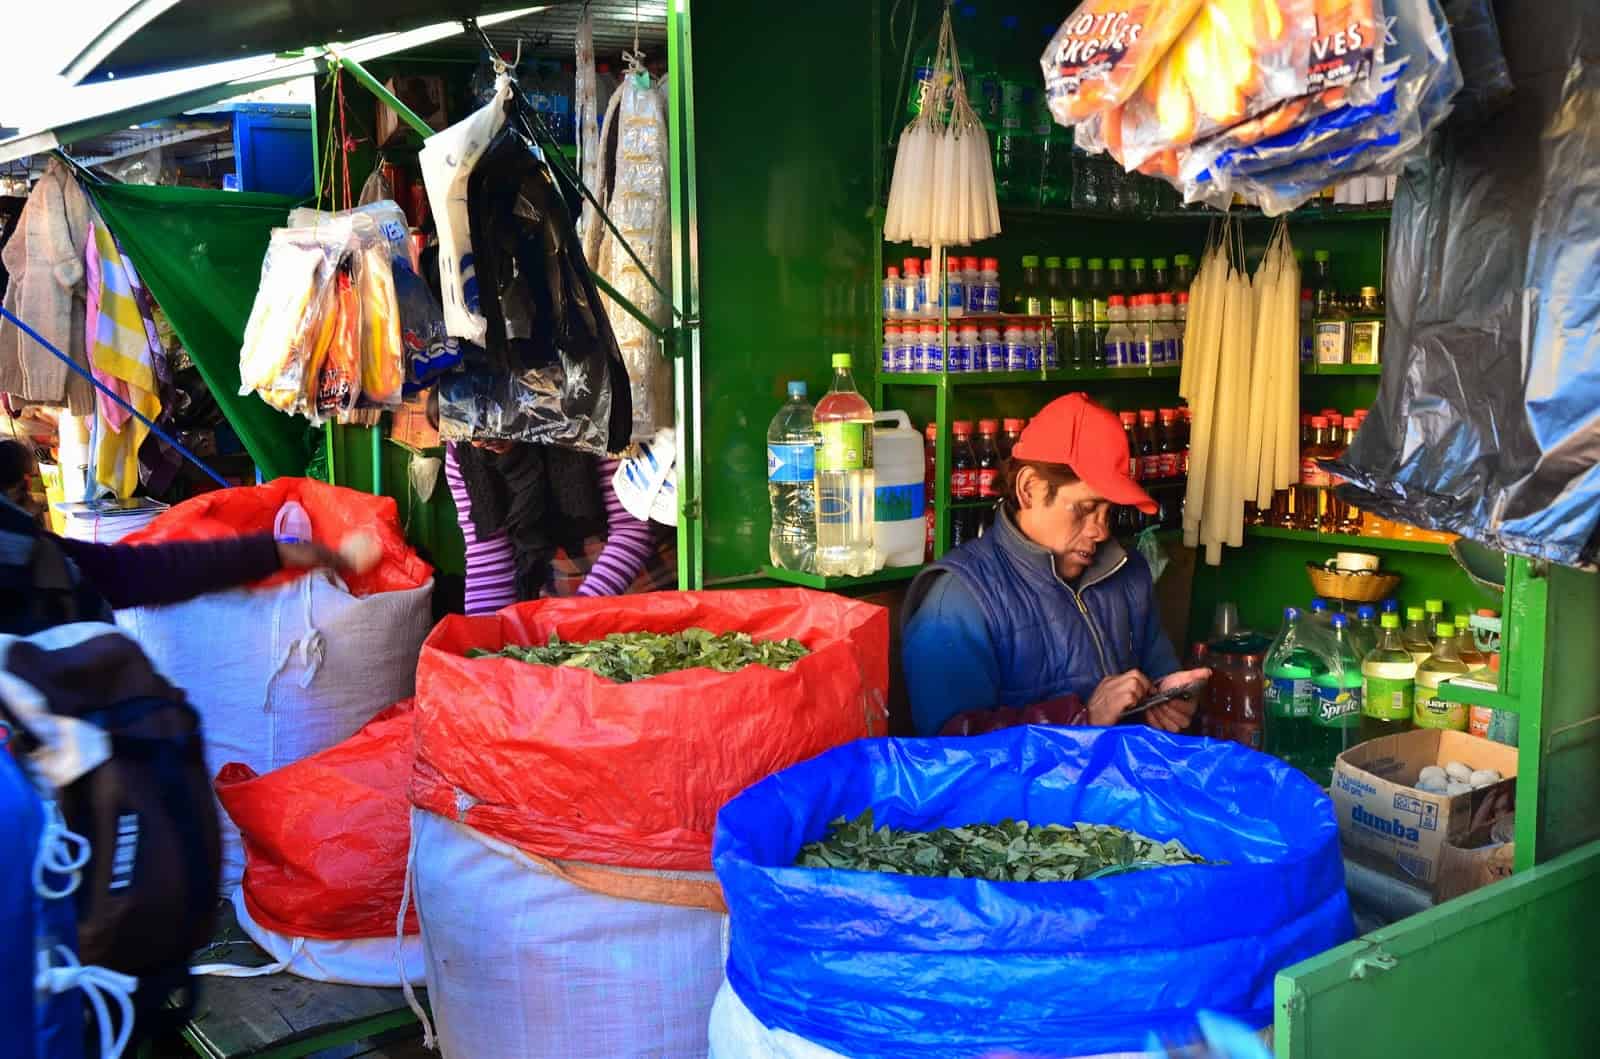 A shop in the miner’s market in Potosí, Bolivia